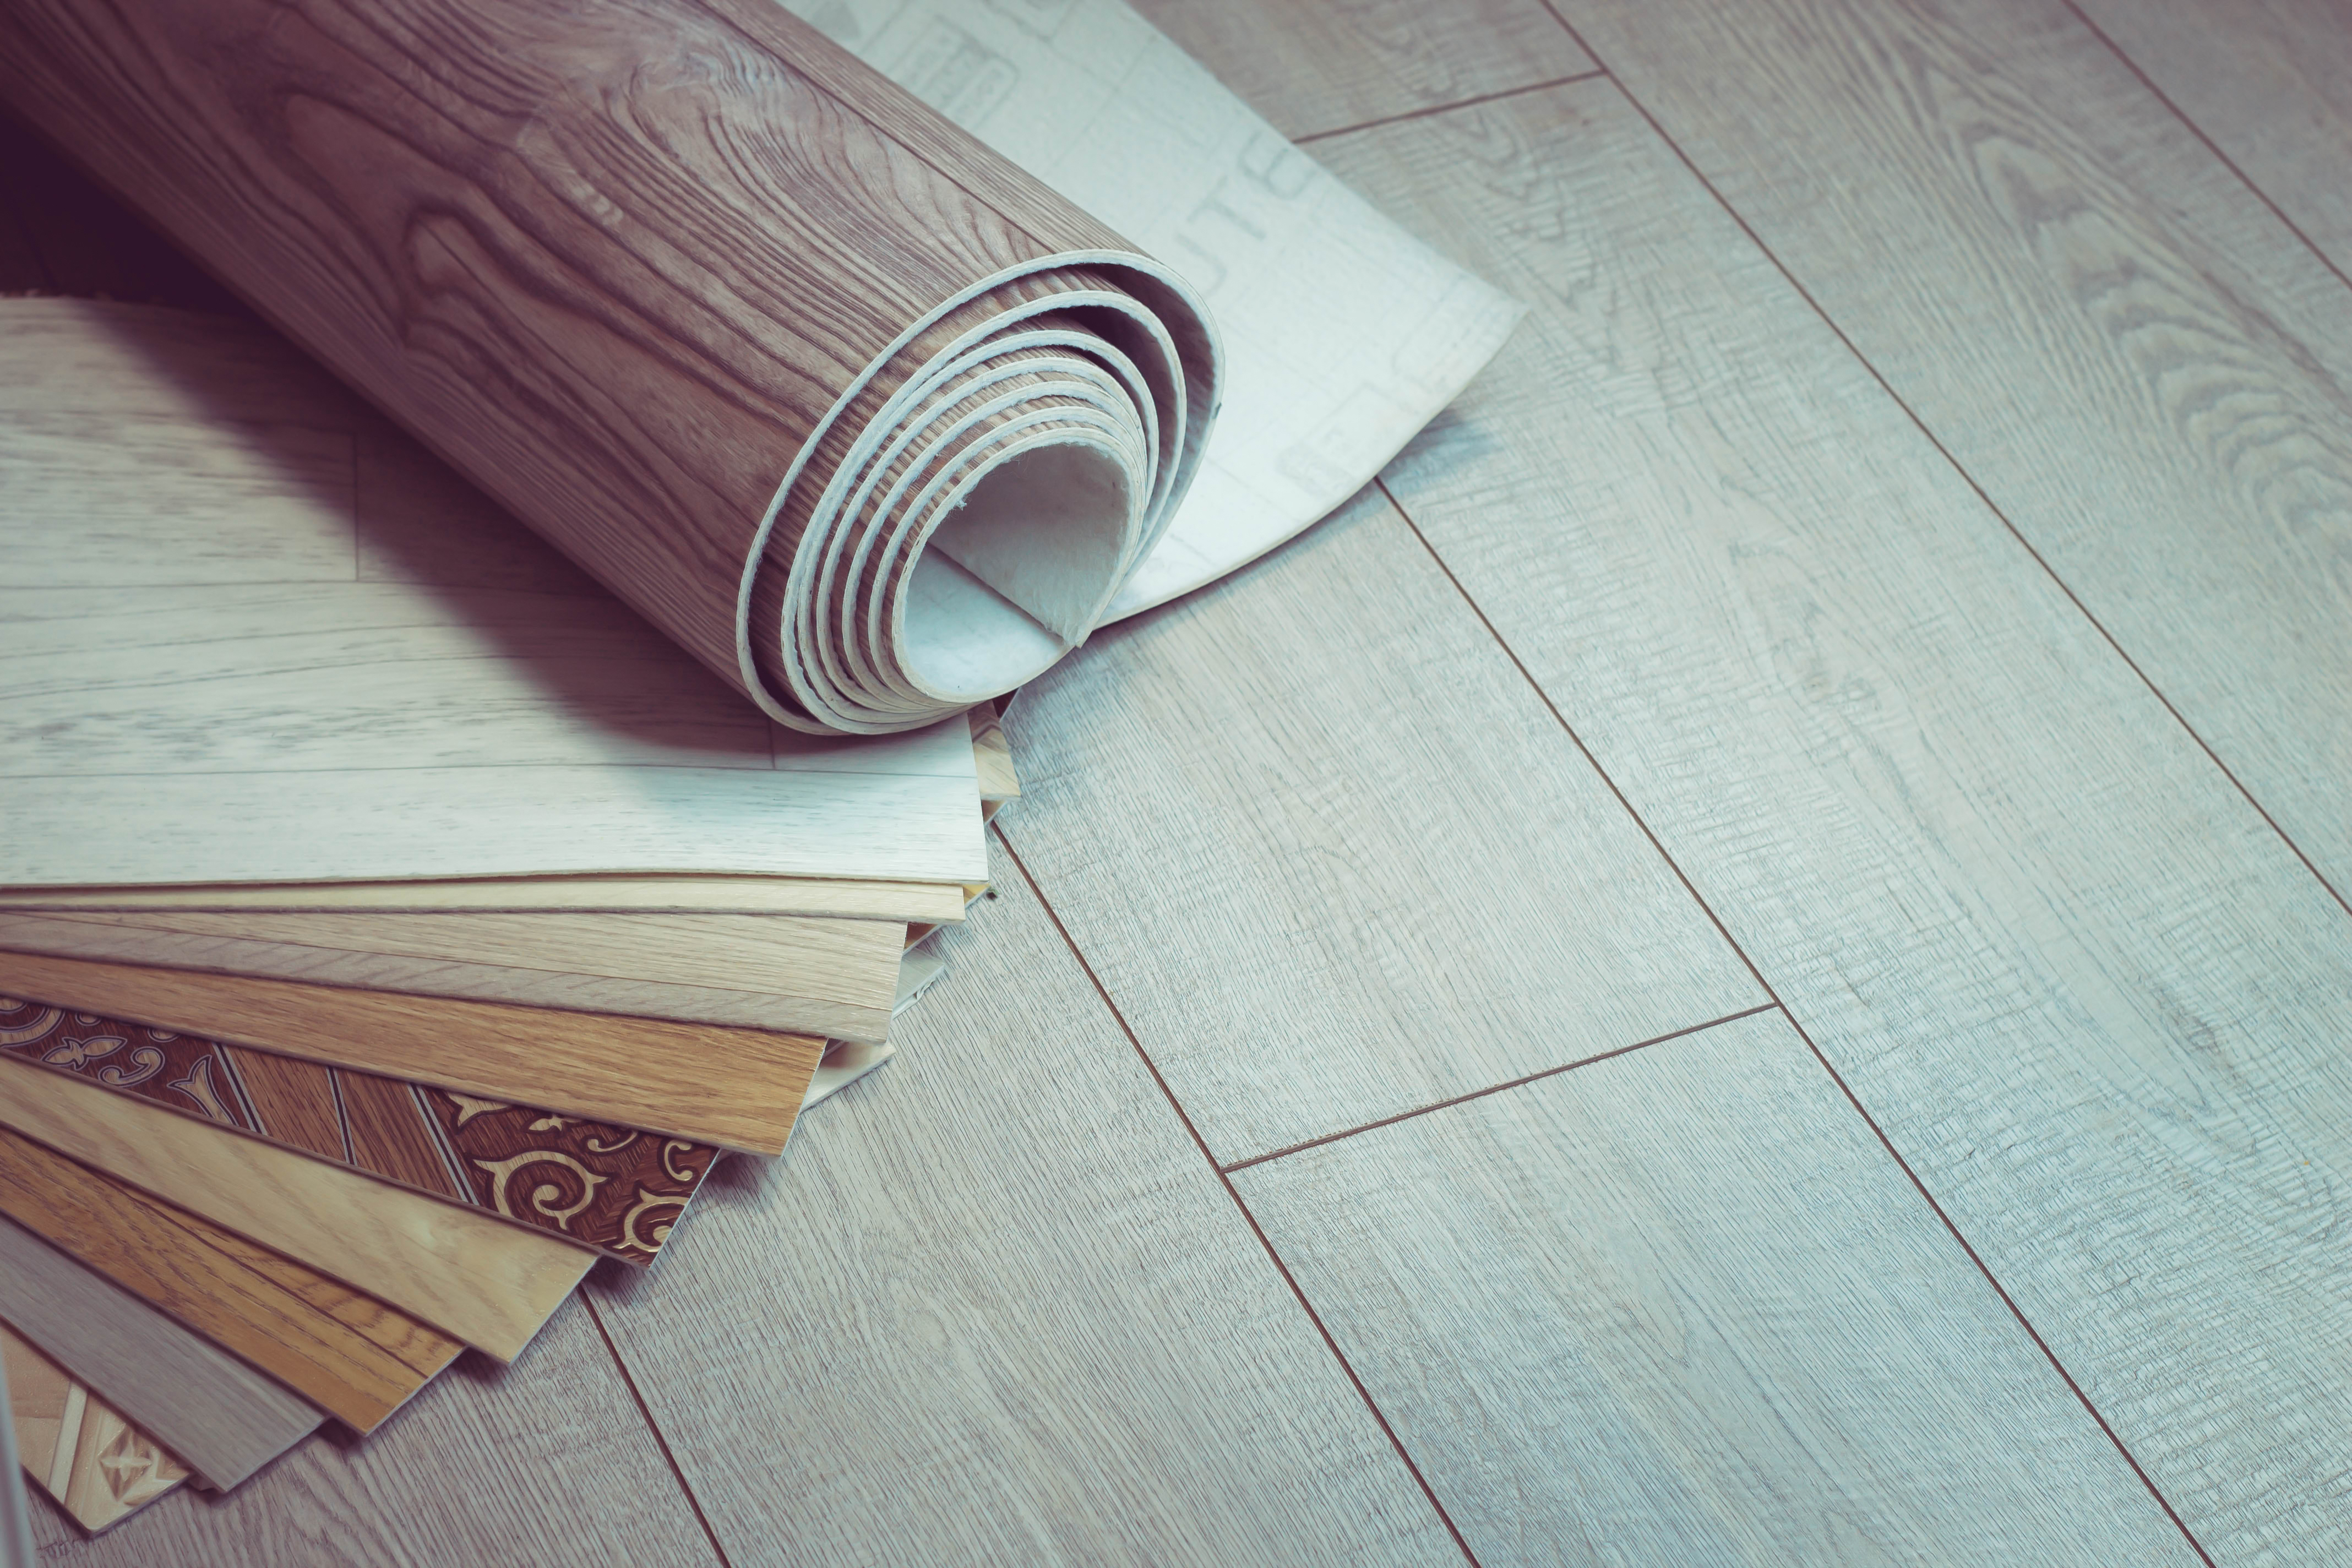 How to Clean Vinyl Flooring Without Damaging It - Advice From Bob Vila